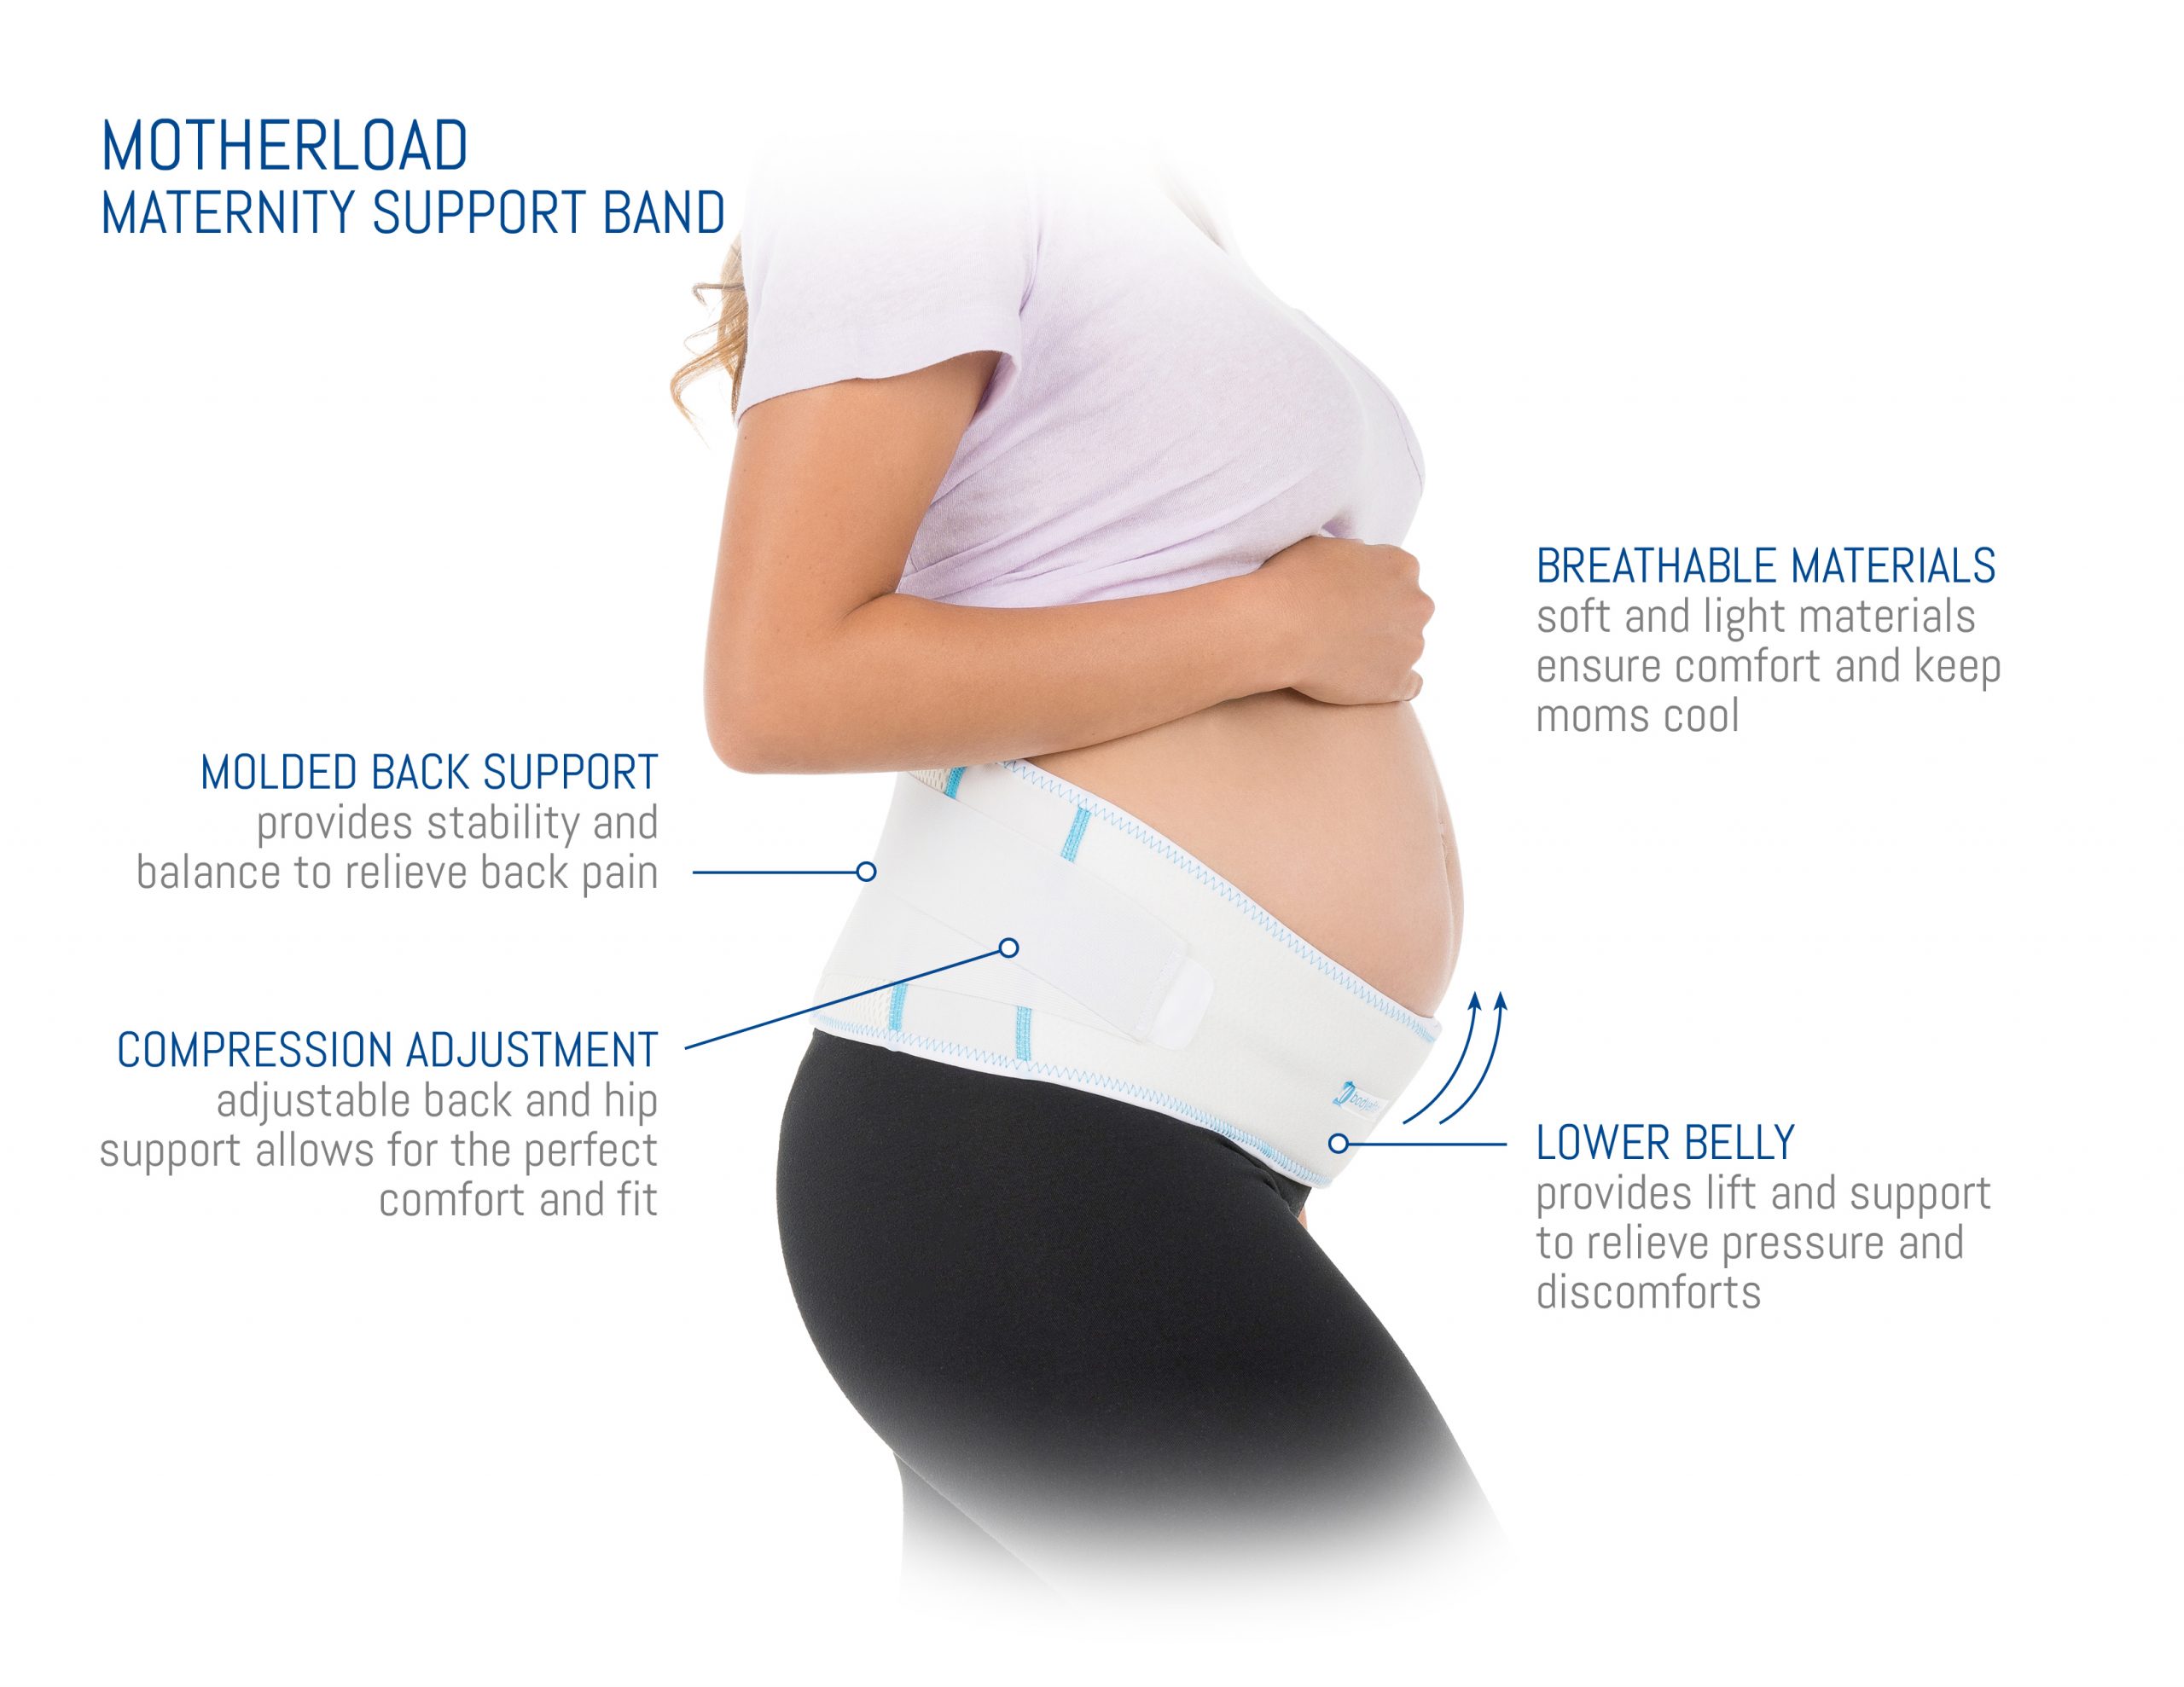 Motherload Maternity Band Features